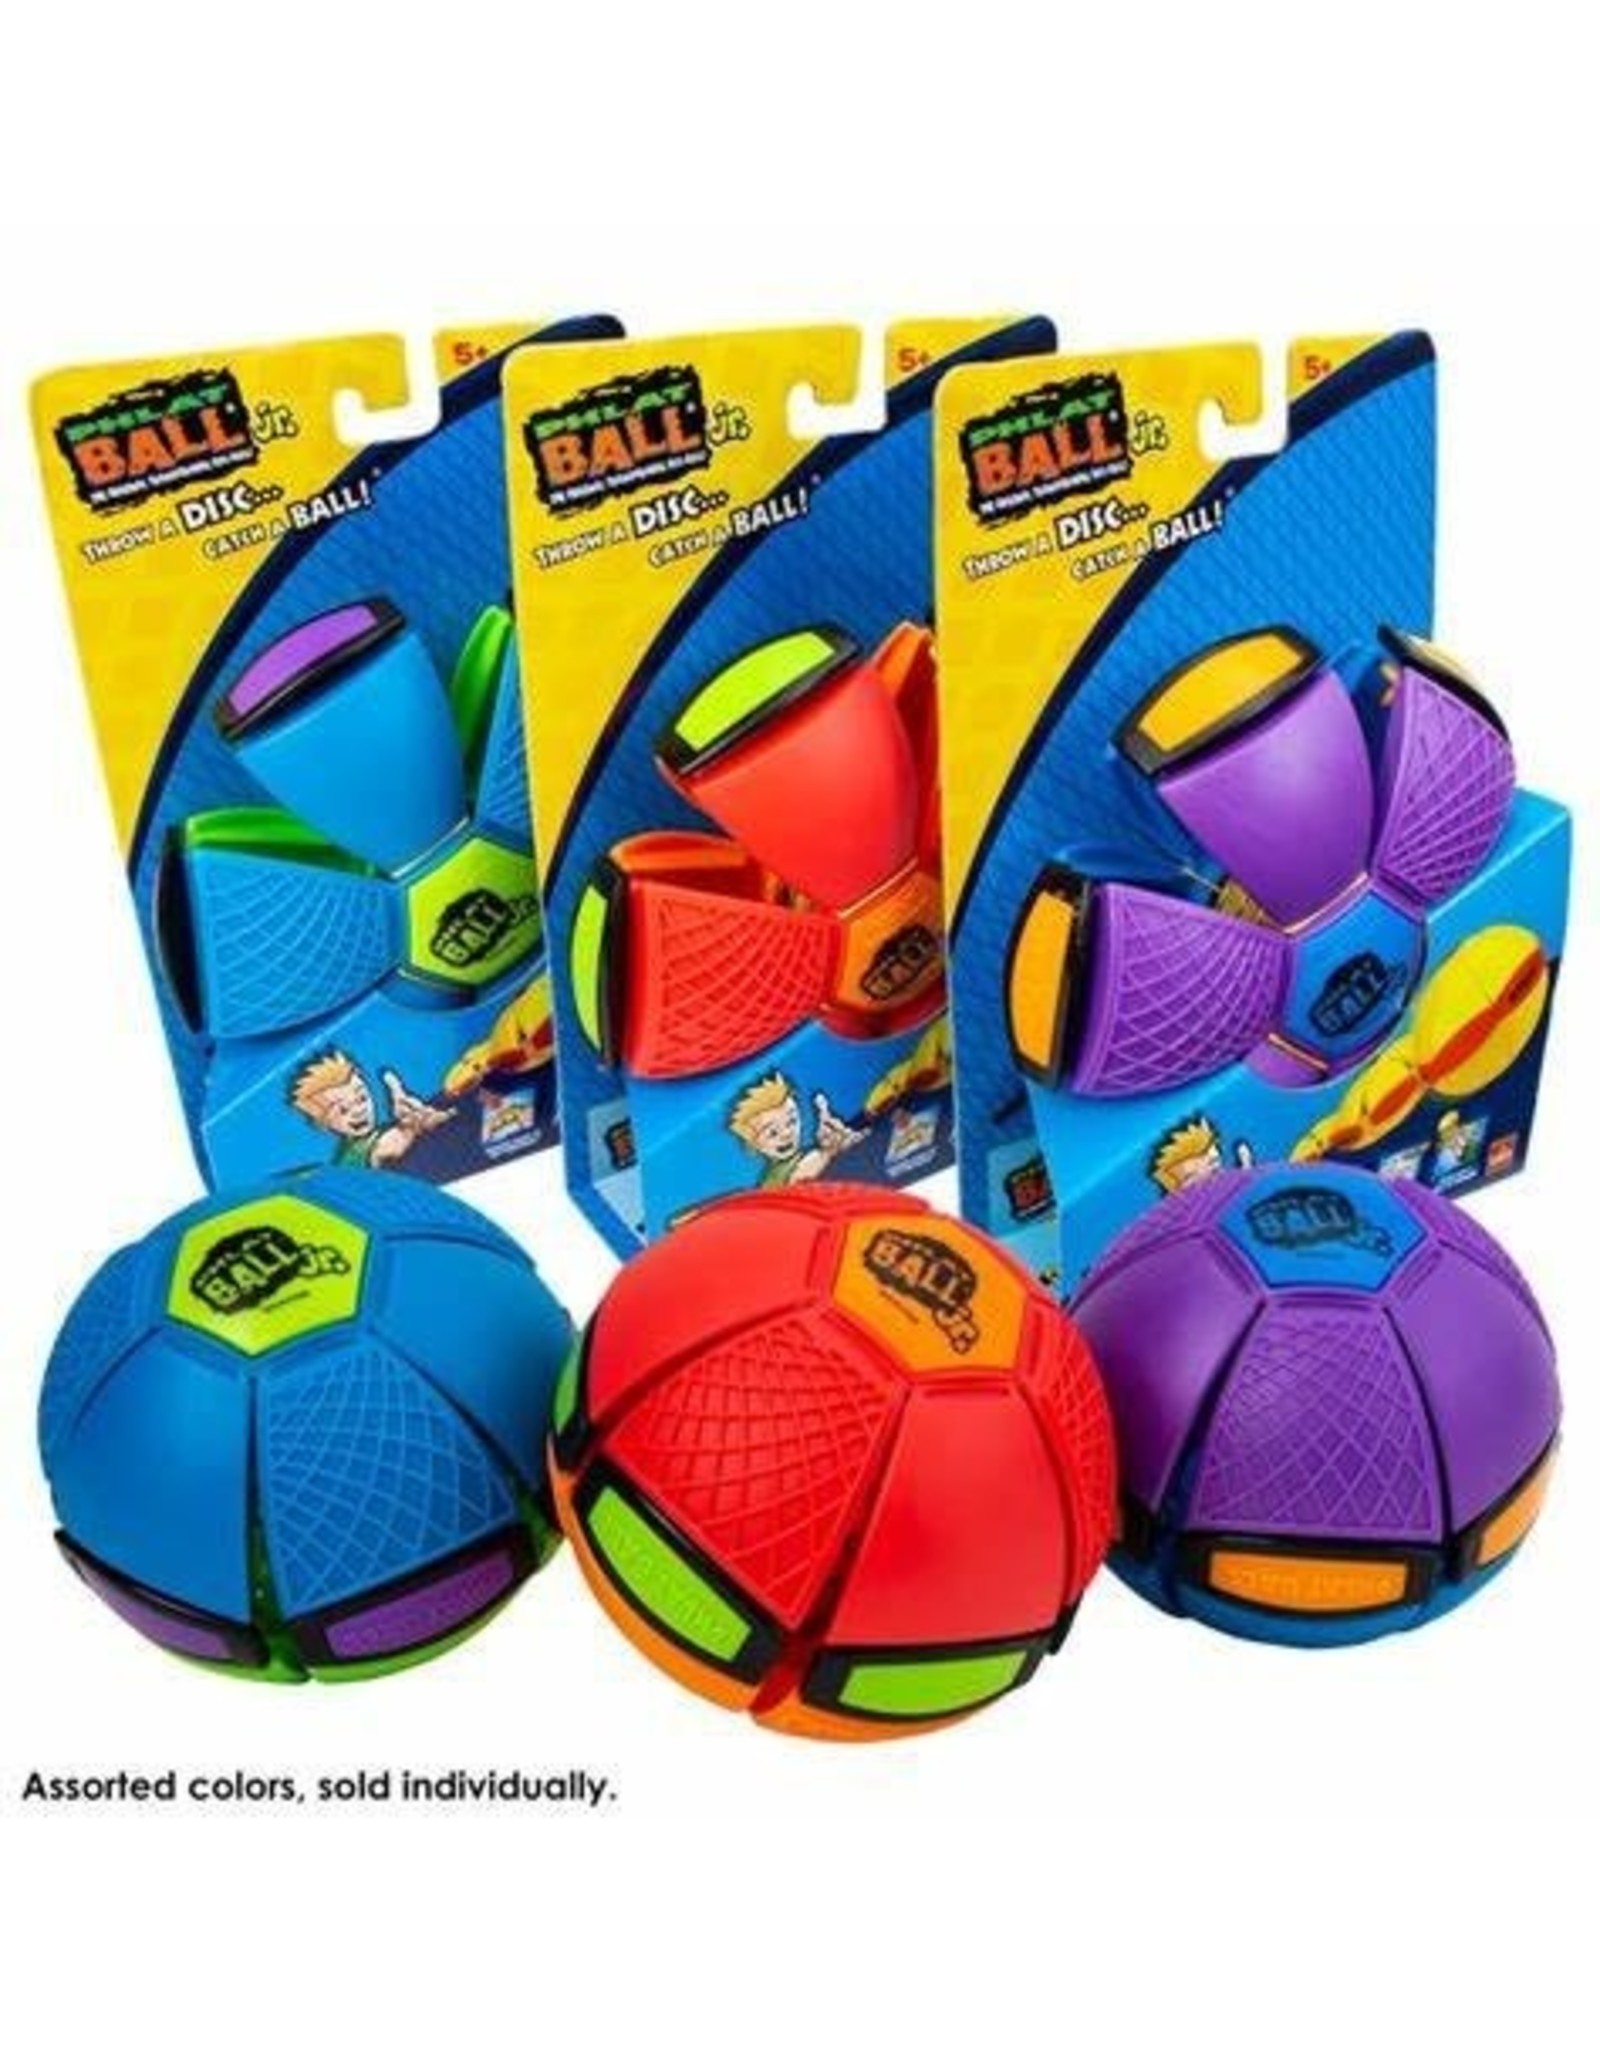 Phlat Ball Jr  Blue Neon Ages 5 Squeeze Throw a Disc Catch a Ball New 